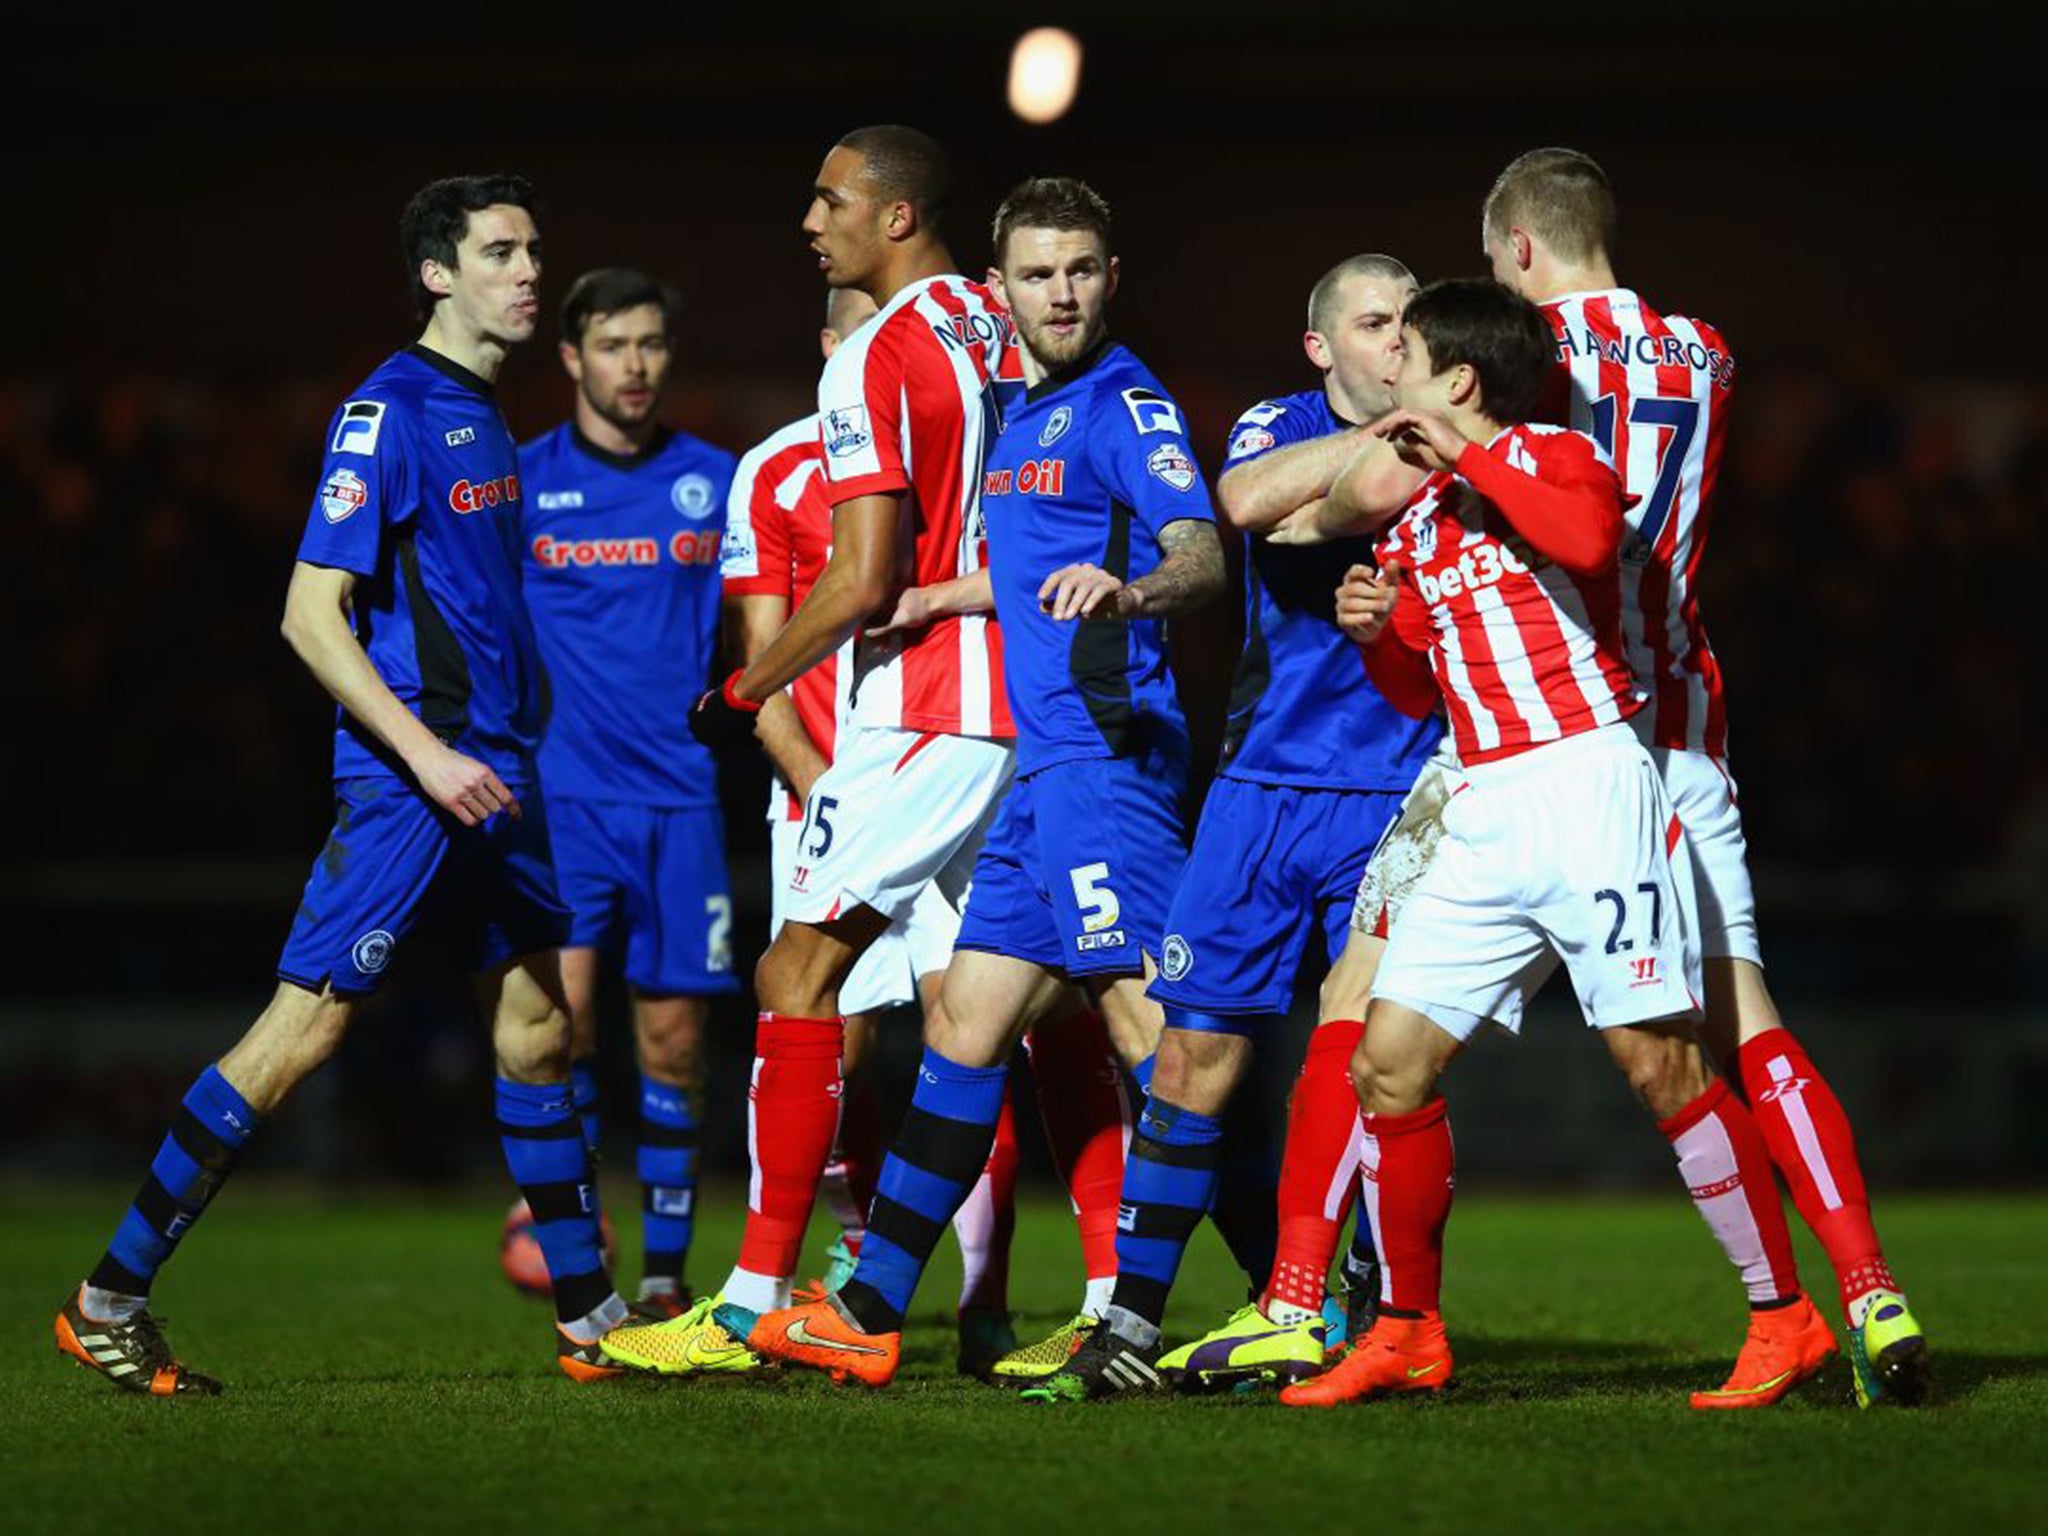 Stoke City’s opening scorer Bojan Krkic (27) has to be separated from Rochdale forward Peter Vincenti (far left) at Spotland on Monday night (Getty)